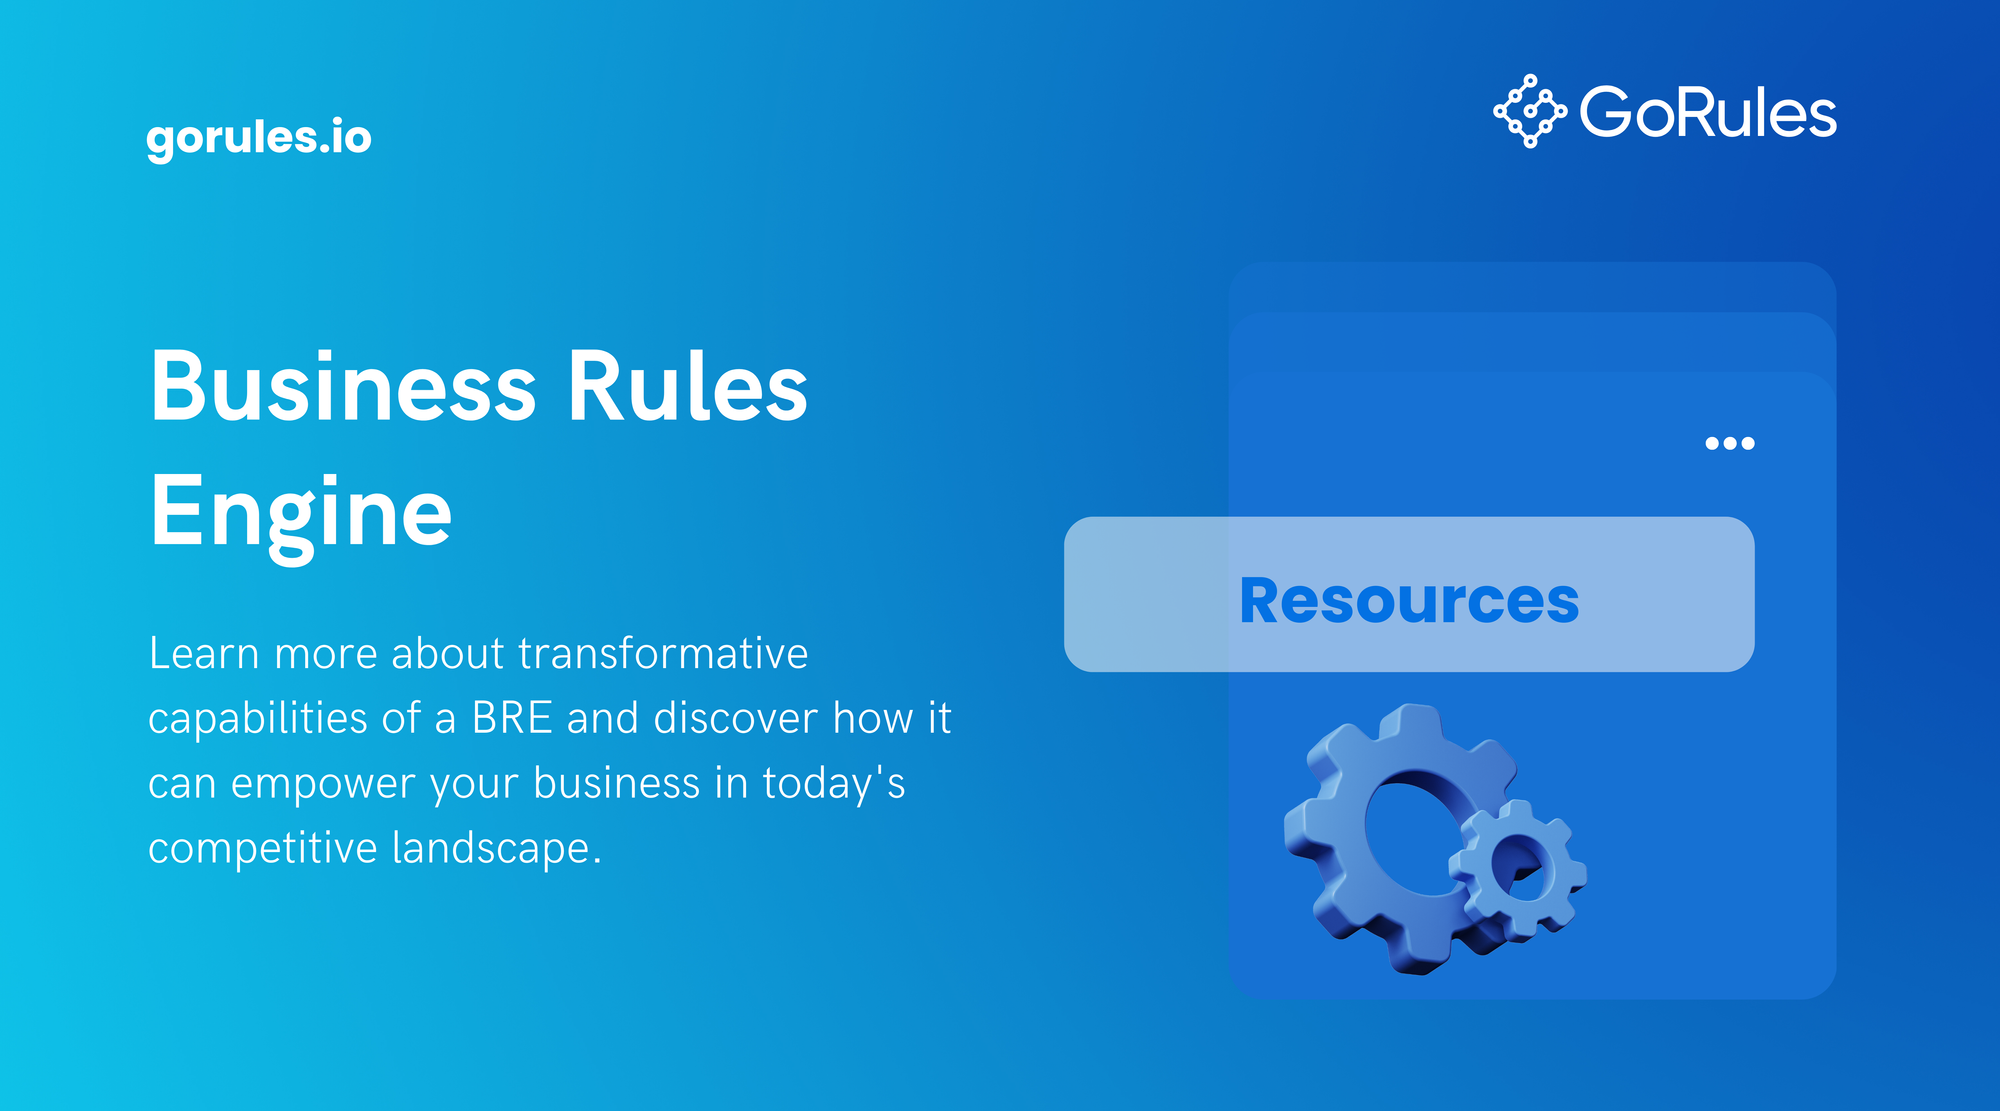 what is business rules engine?